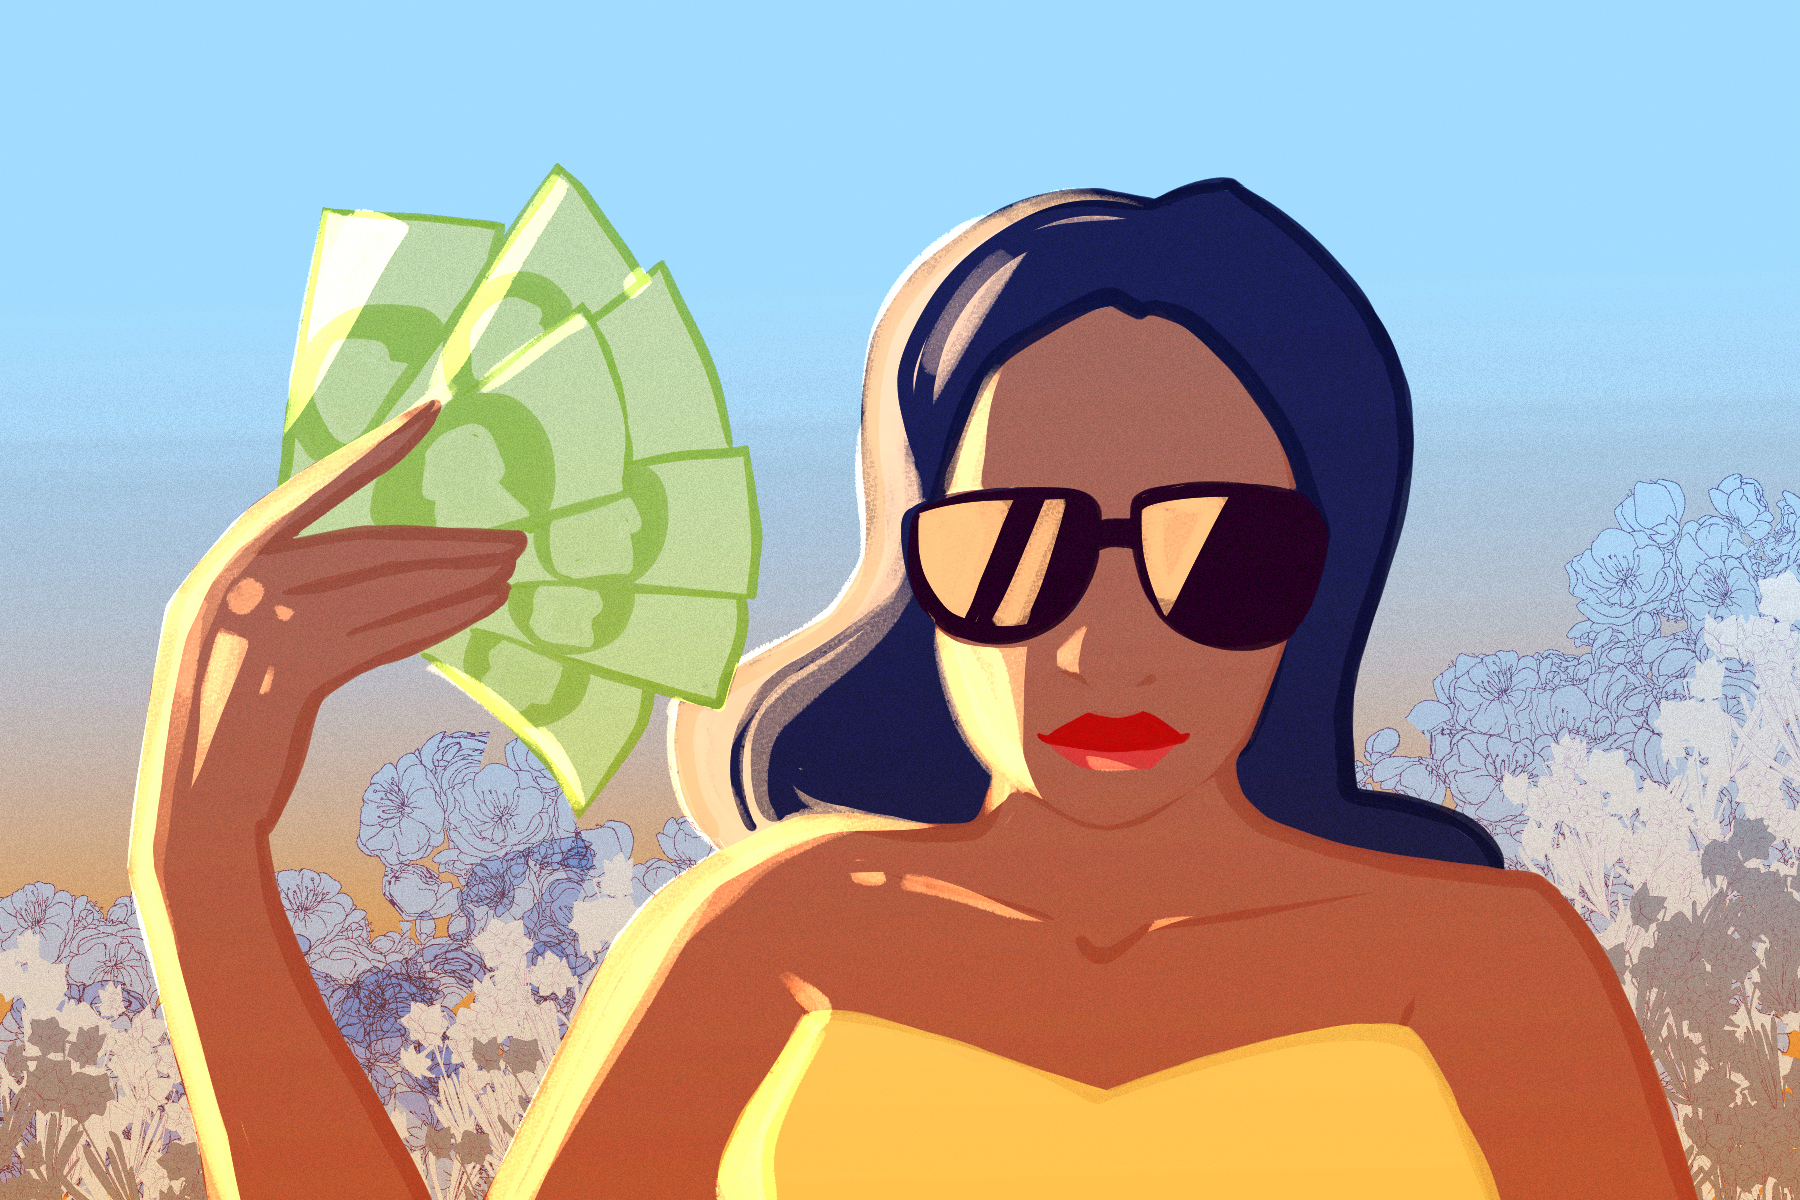 in an article about saving money for travel, someone fanning out cash while wearing sunglasses